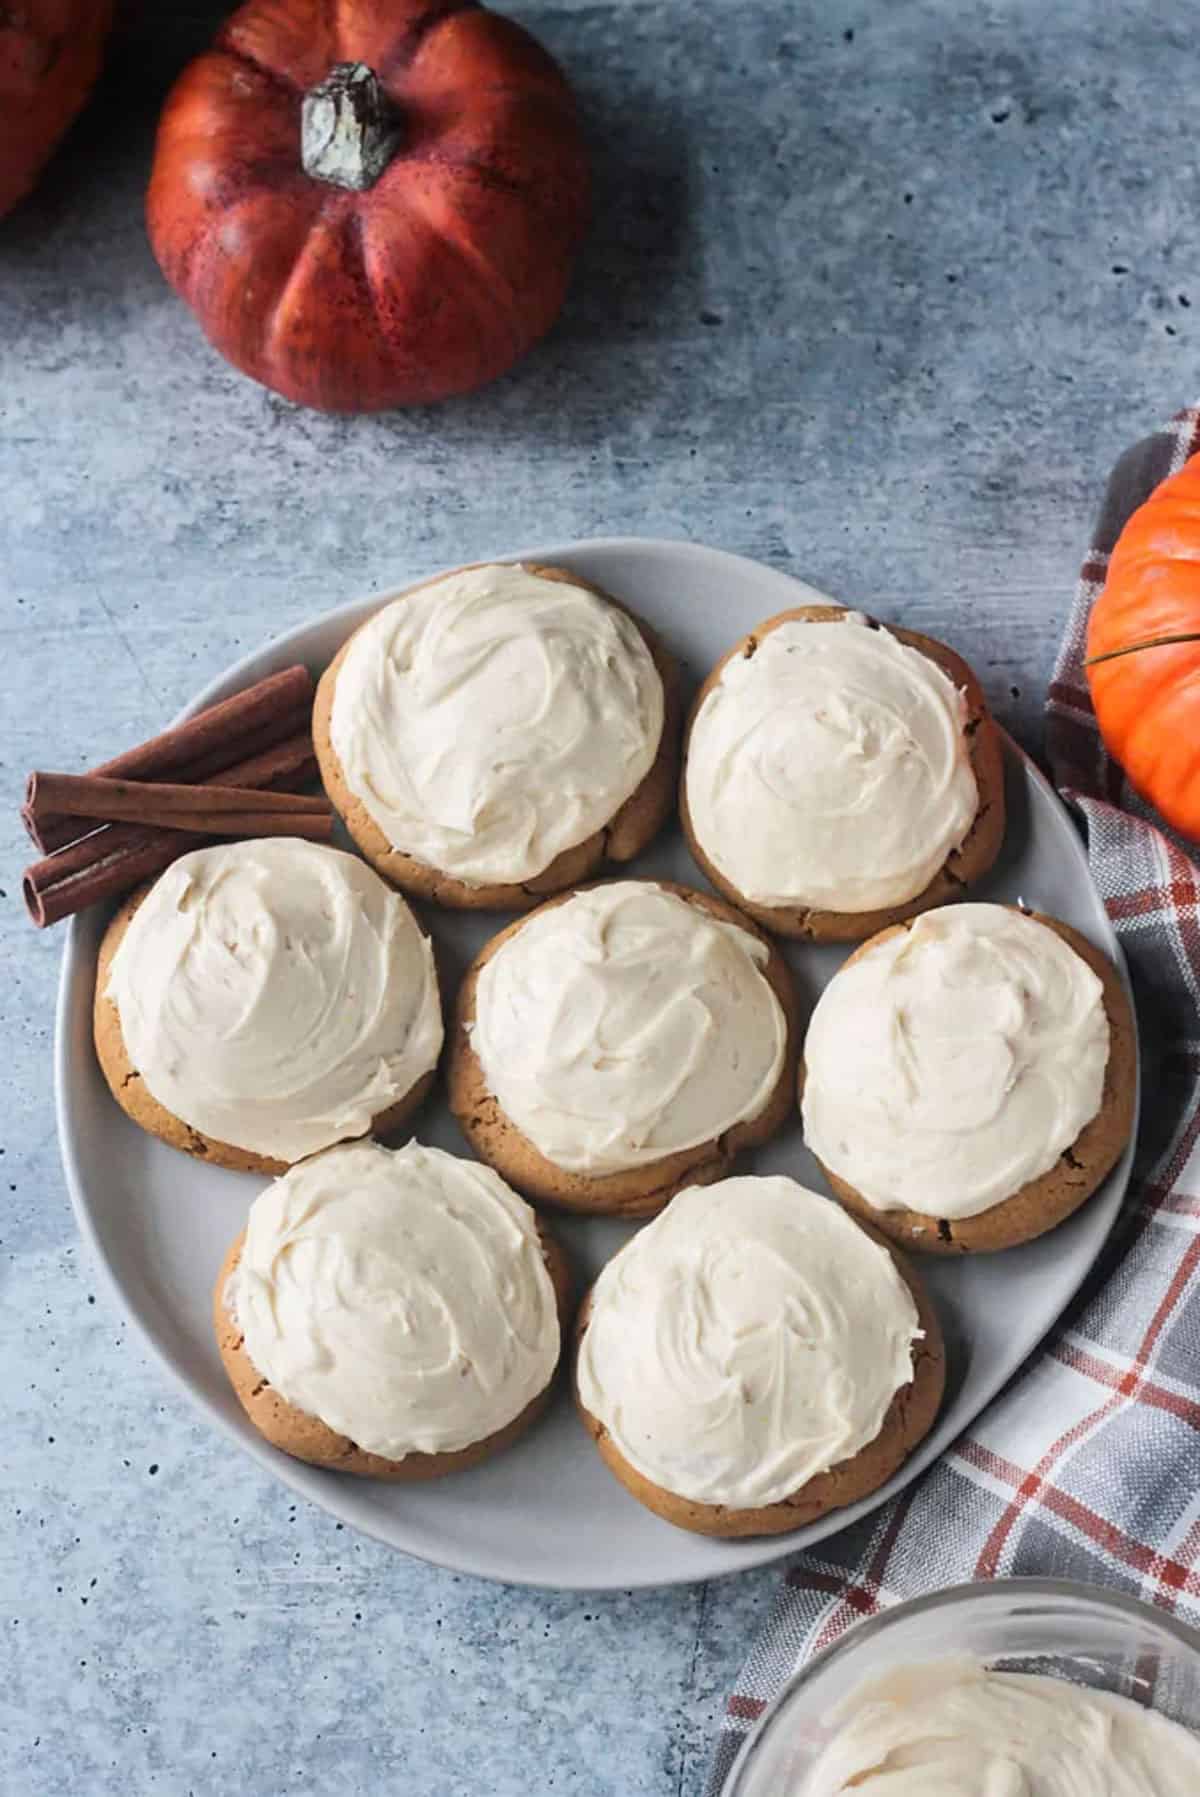 7 pumpkin cookies with white frosting on a plate w/ 3 cinnamon sticks.